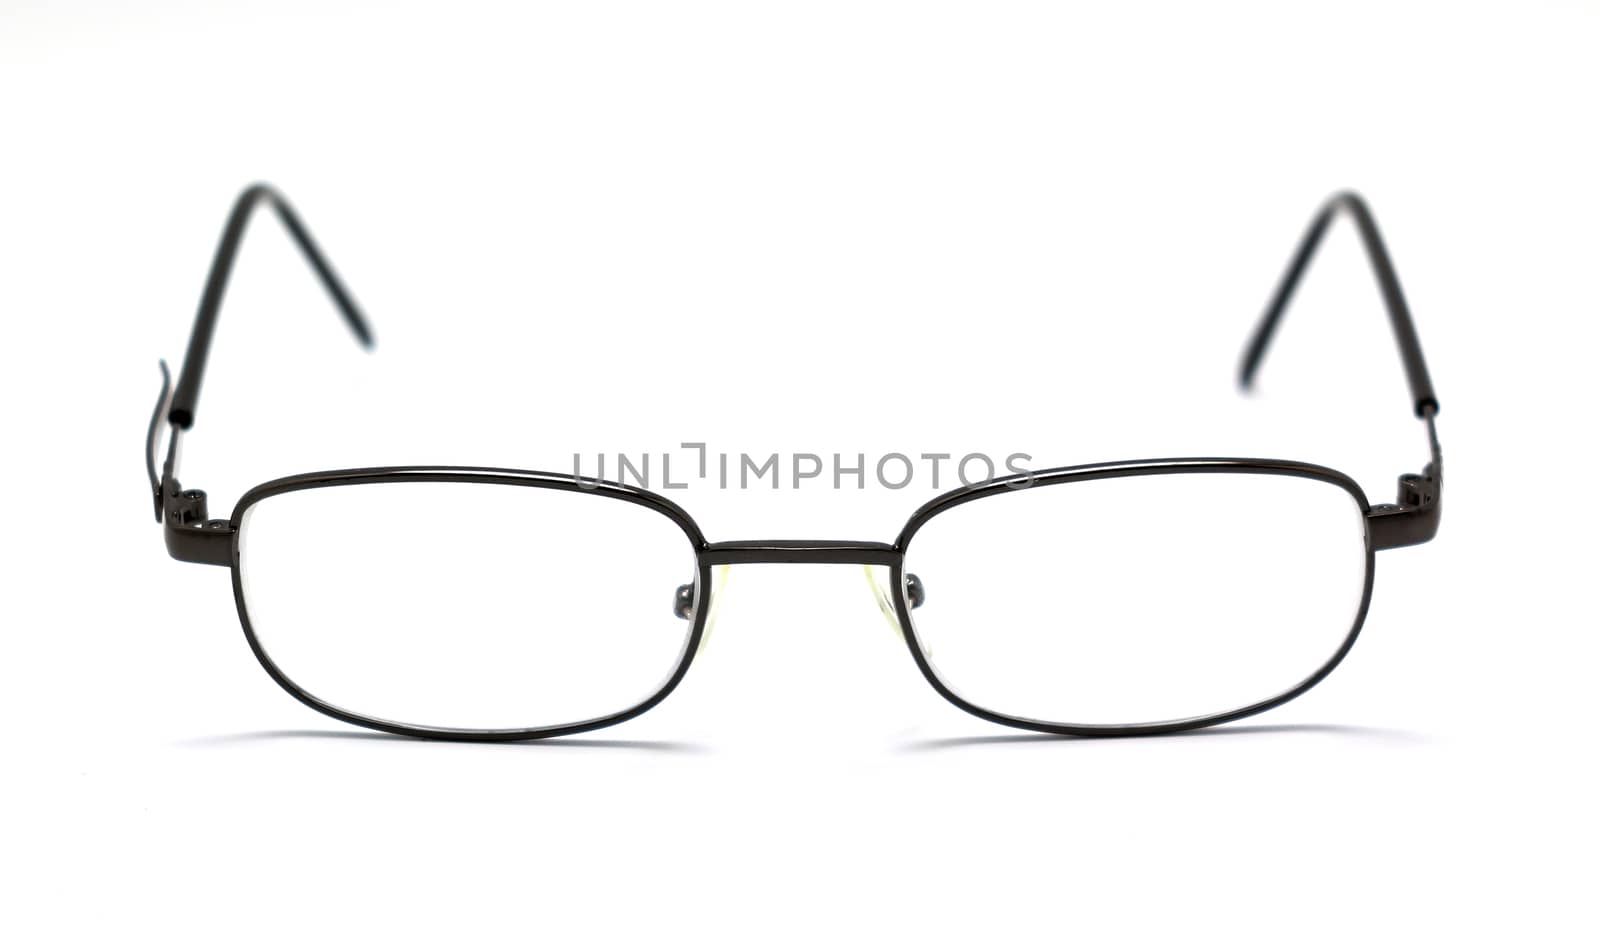 eye glasses isolated on white by leisuretime70